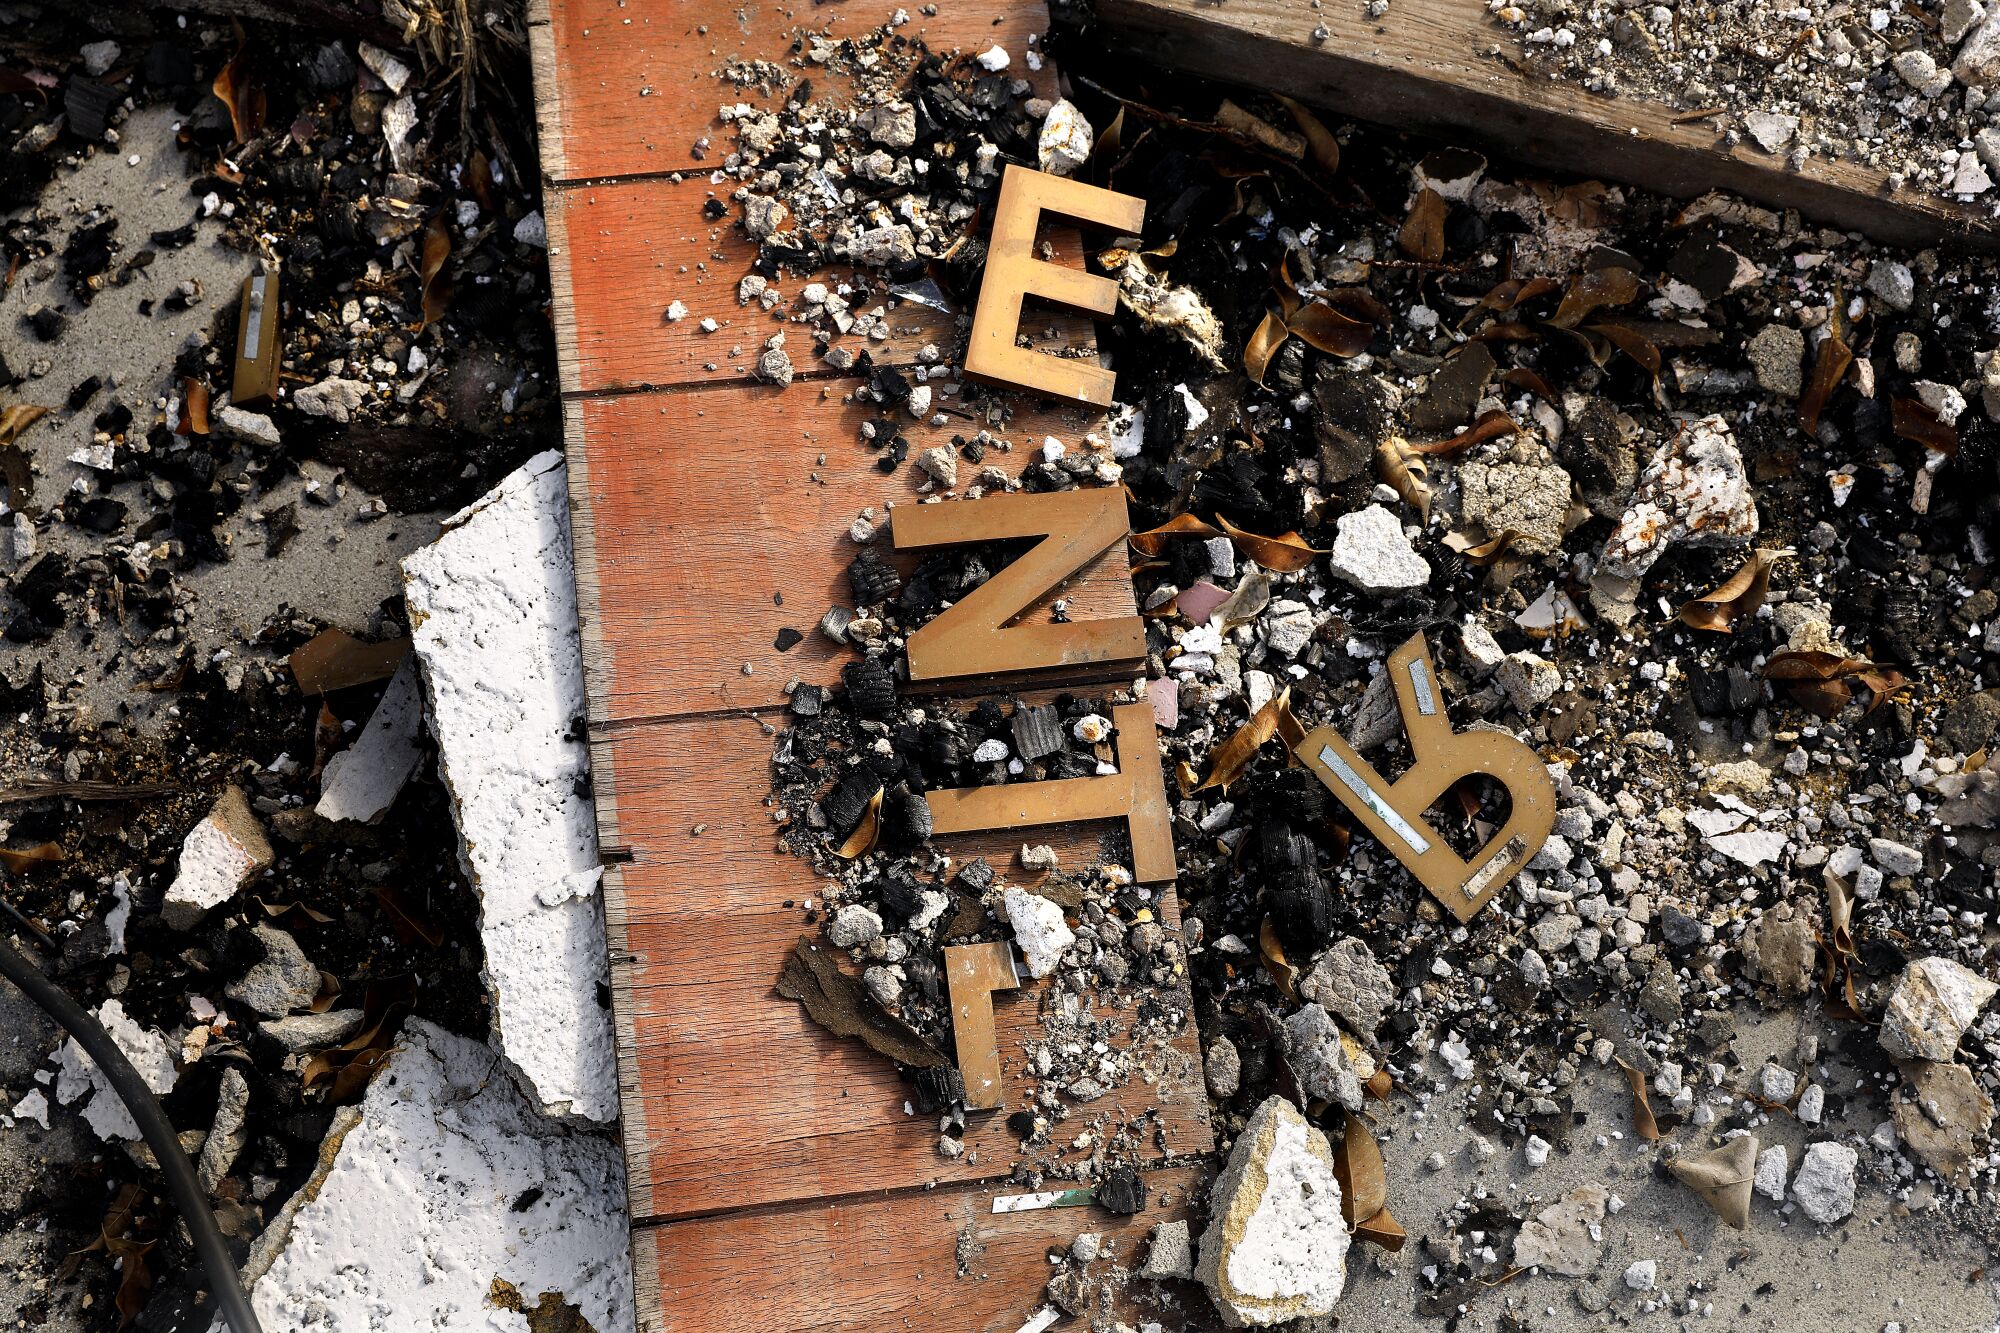 A burned "Enter" sign at Victory Baptist Church in South Los Angeles